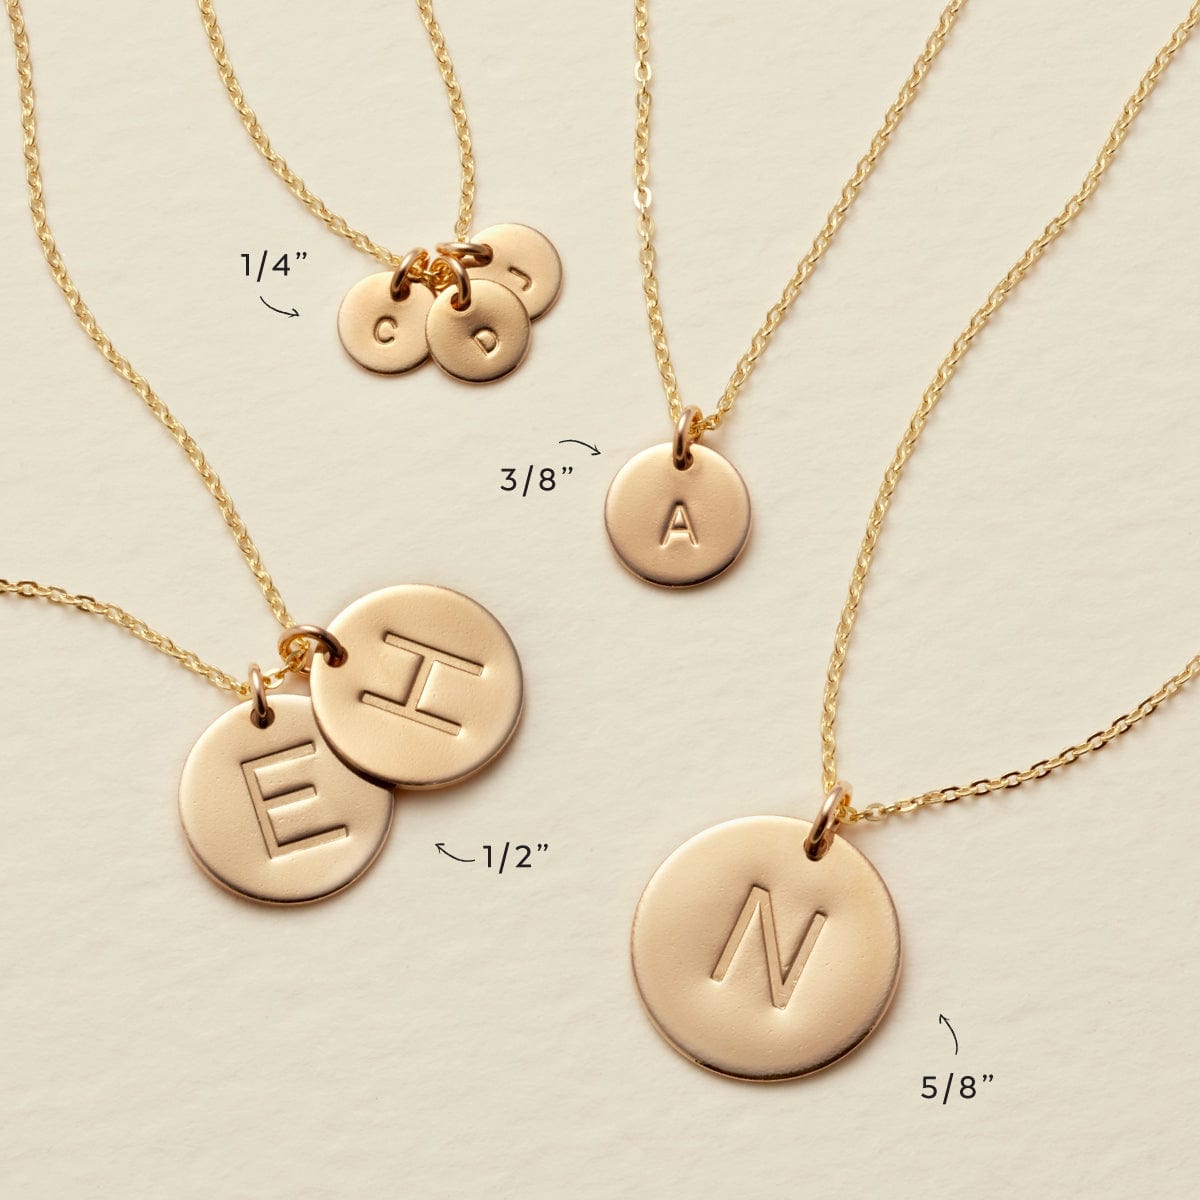 Engraved initial charm necklace - 14k Gold filled 5/8 monogram pendant  option of multiple charms - Personalized monogram Gift for her